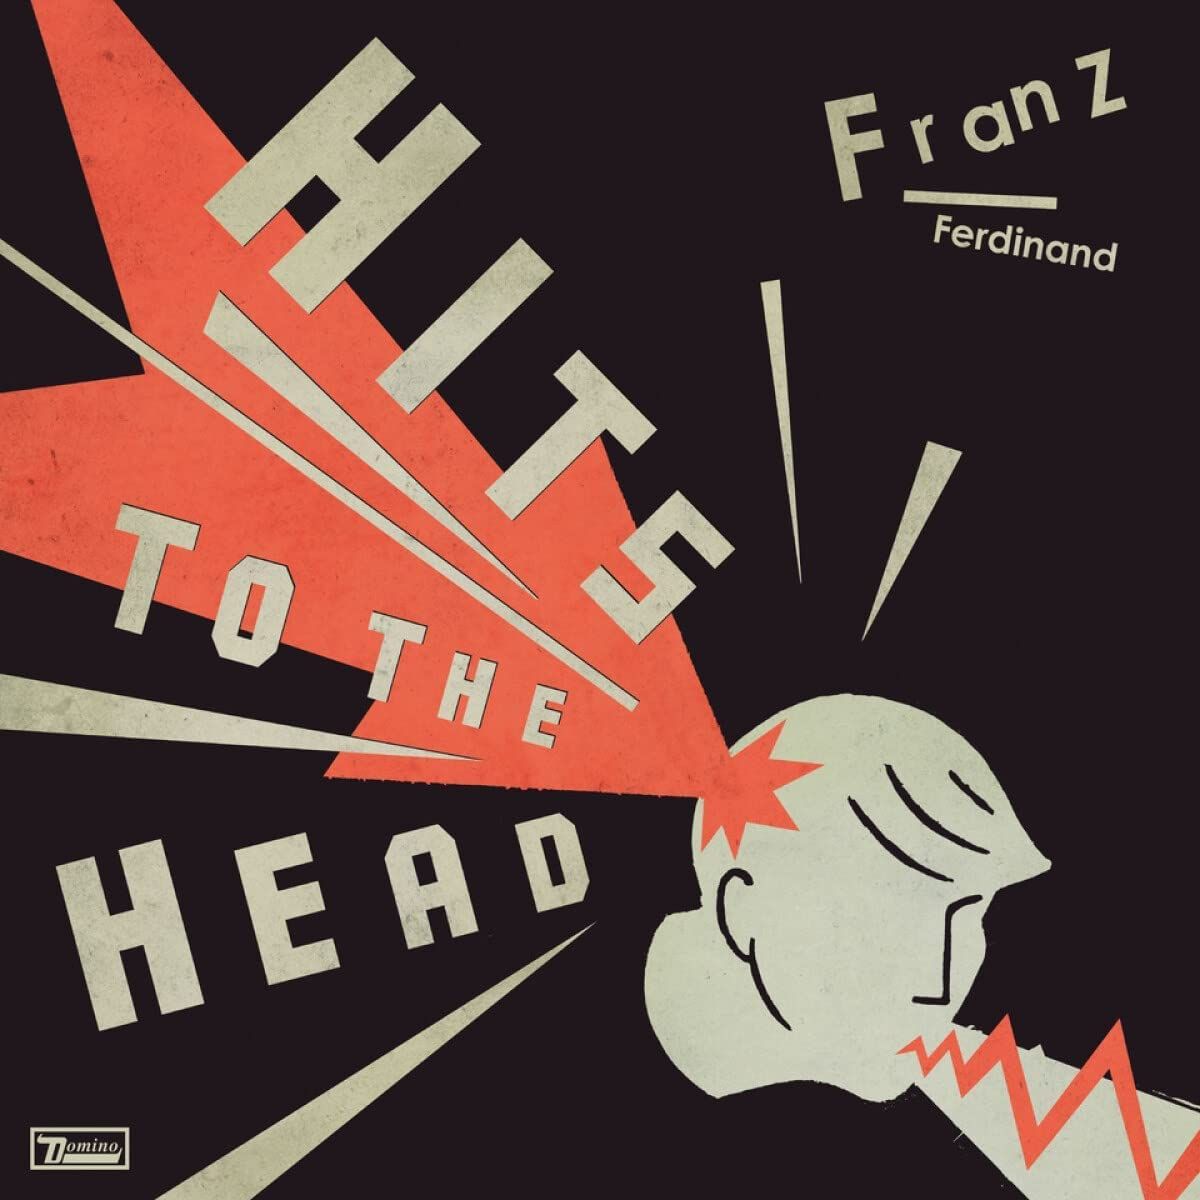 Live review: Franz Ferdinand – Hits to the Head Tour